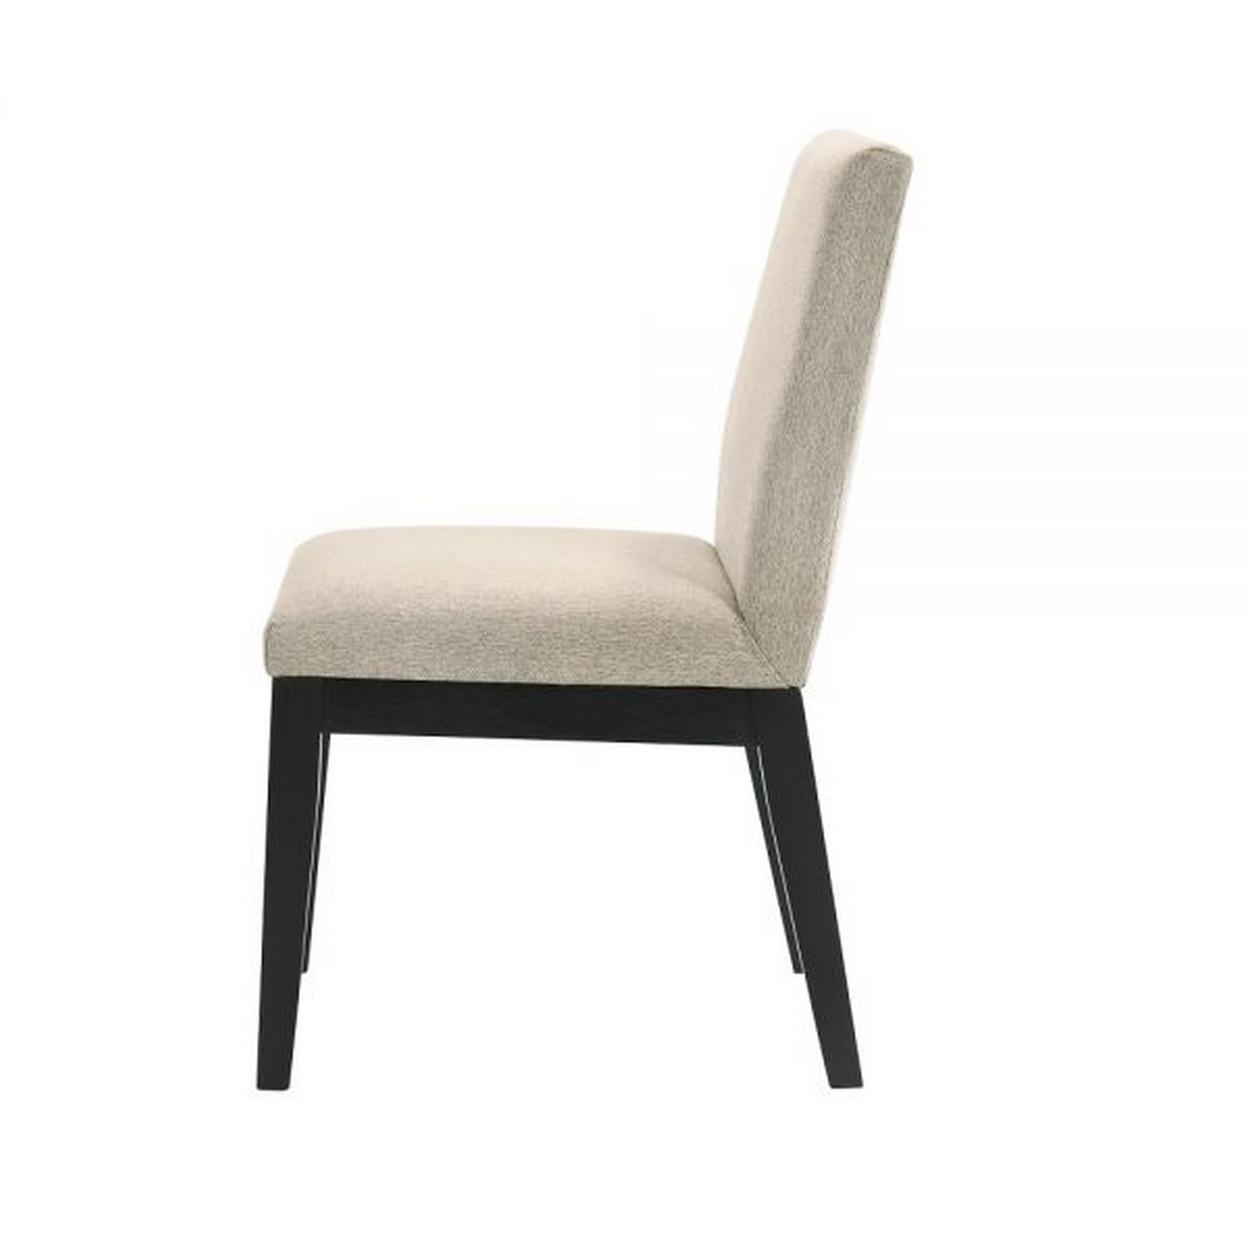 Fin 23 Inch Dining Chair, Set Of 2, Fabric Upholstery, Beige And Black - Saltoro Sherpi